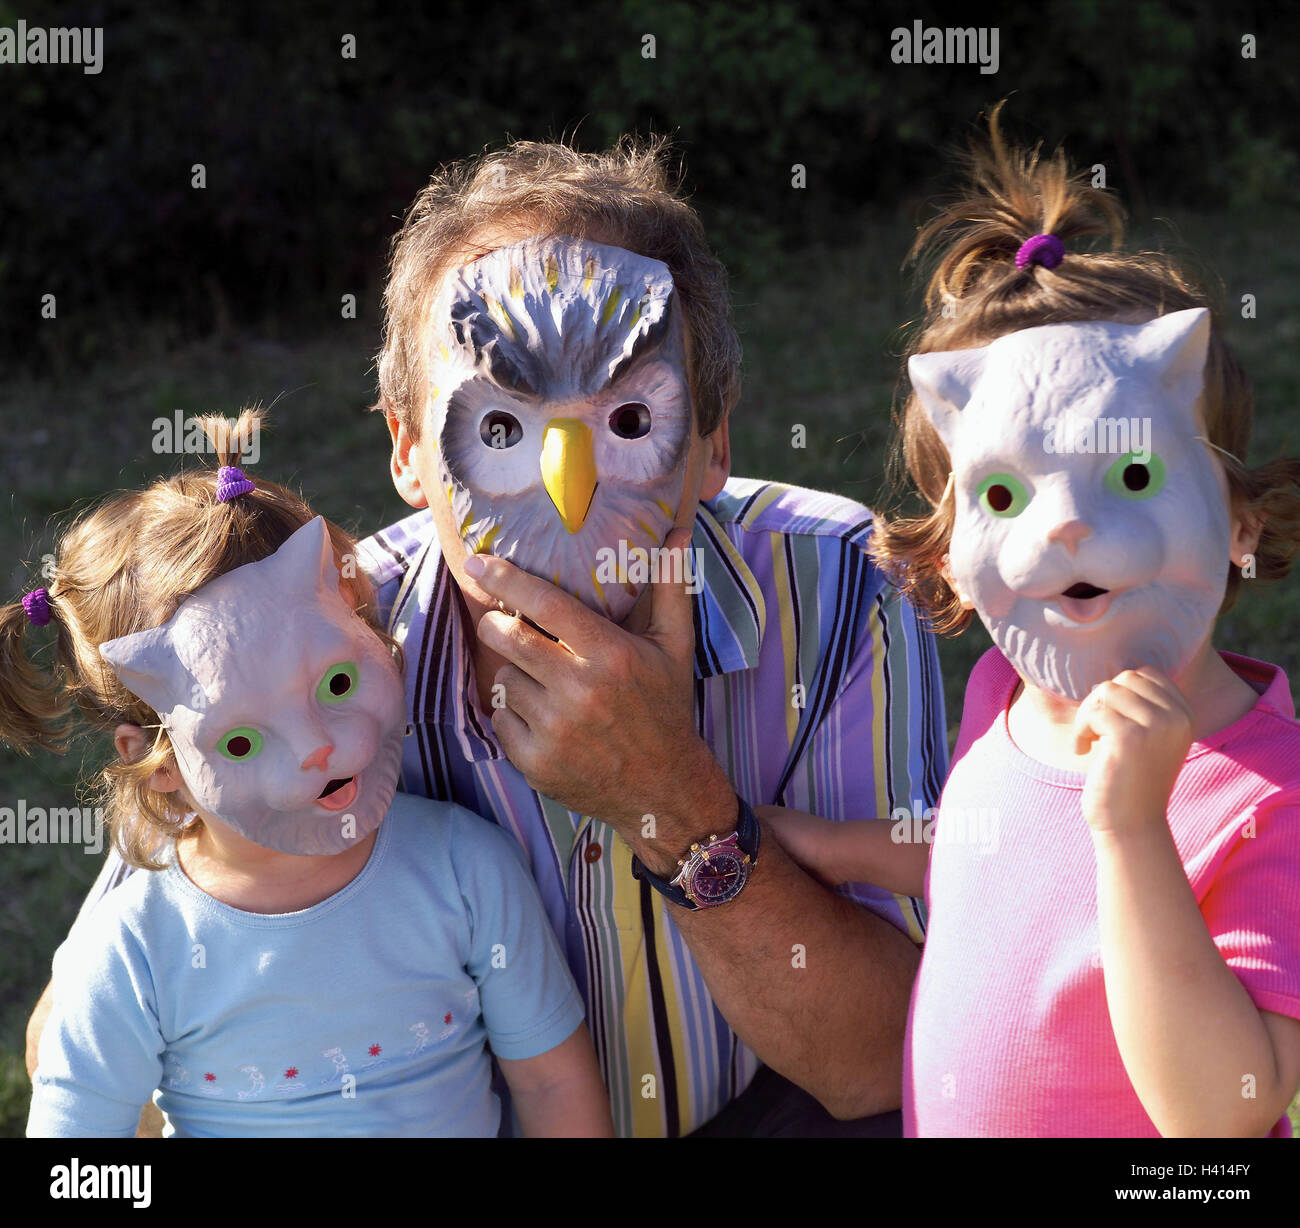 Adult, children, girls, animal masks, meadow, man, father, infants, subsidiaries, 3 - 4 years, masking, lining, masks, animal looks, mask, panel, hide, play anonymously, unrecognized, game, together, pose, fun, amusements, positive mood, childhood, leisur Stock Photo